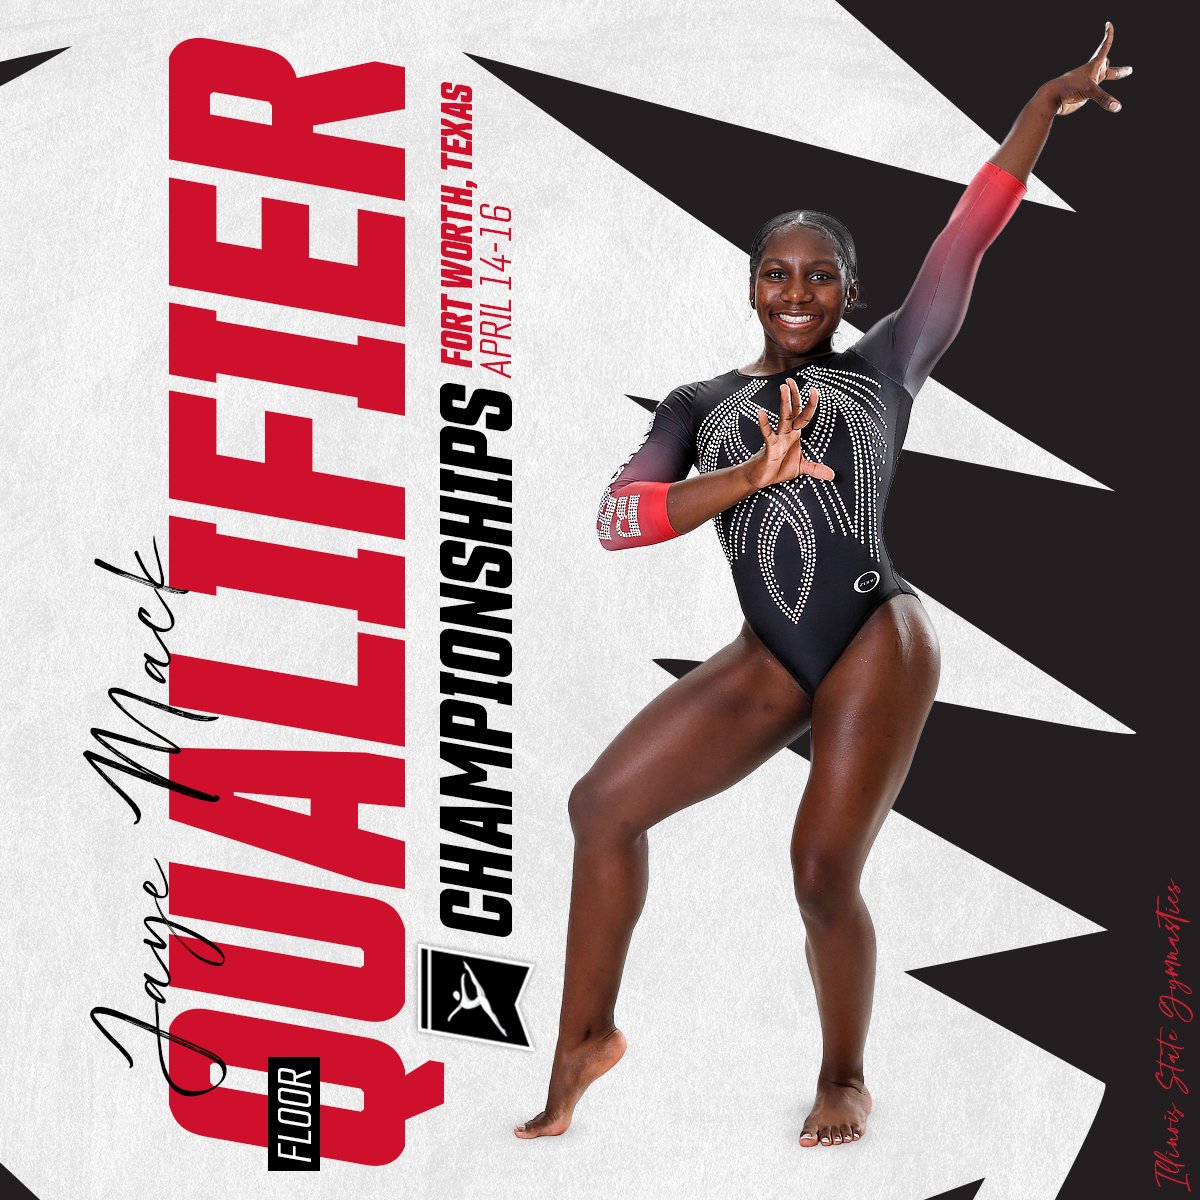 For the second time in as many years, a Redbird is headed to Texas for the #NCAAChampionships!  

Freshman Jaye Mack has qualified on floor and will represent the 'Birds April 14-16 in Fort Worth #SeeHerGreatness